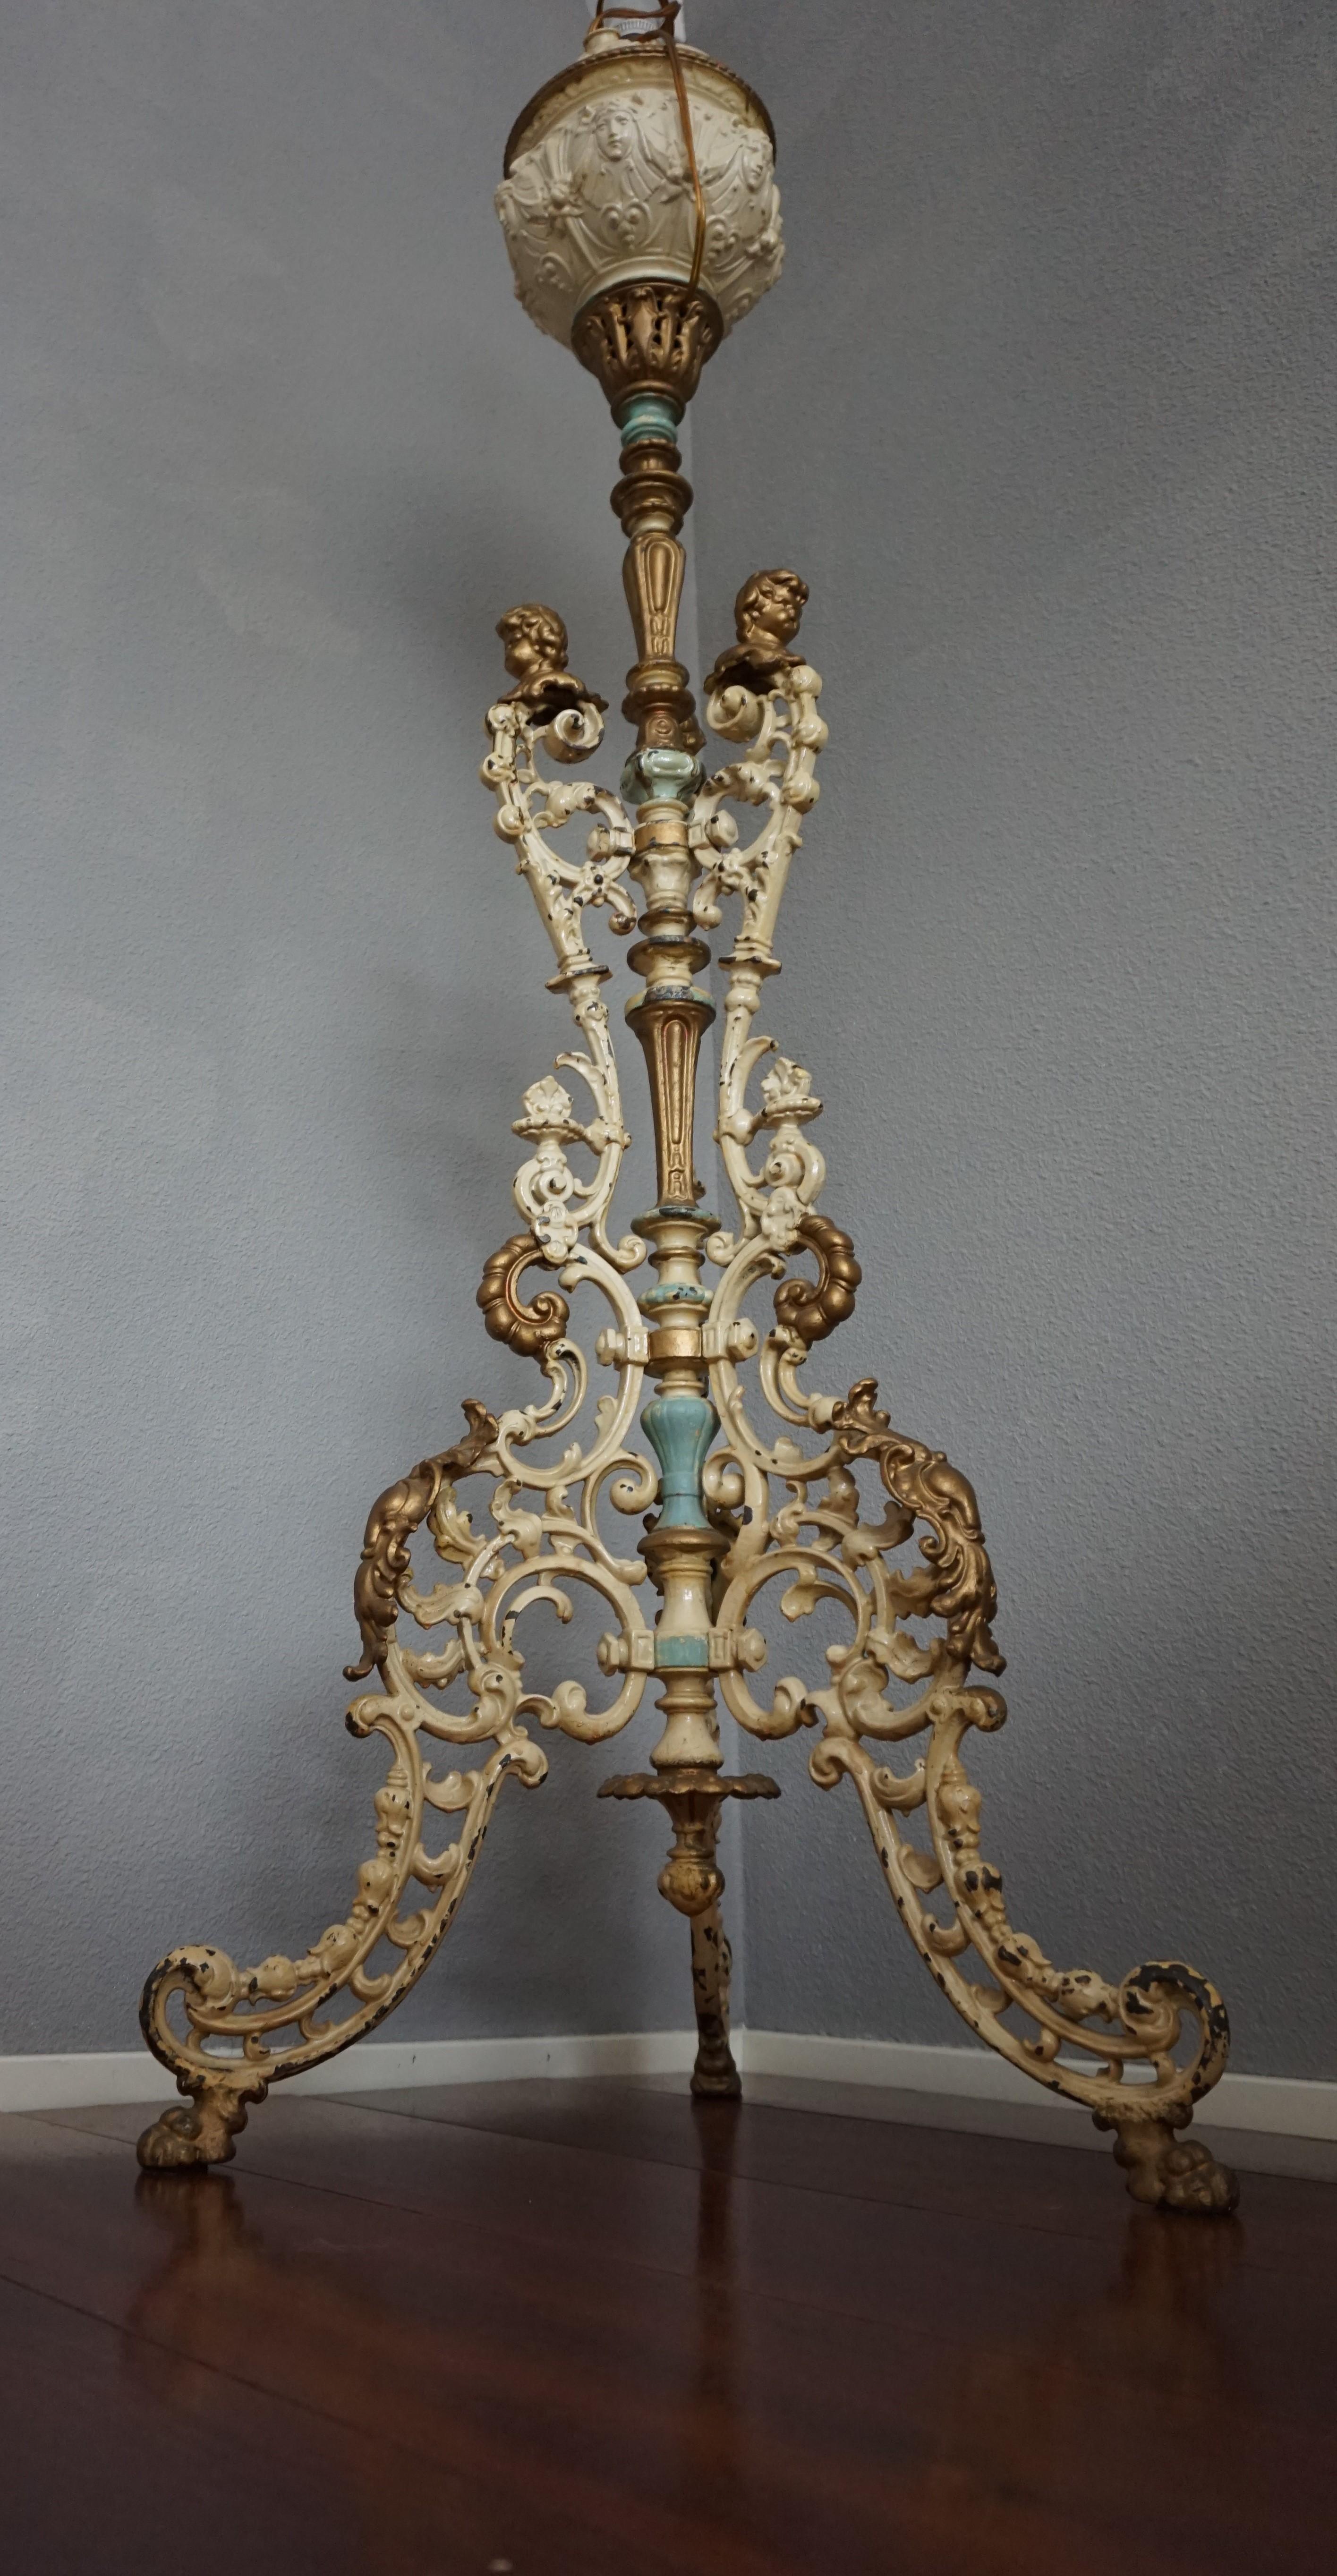 Antique and Painted Cast Iron Baroque Revival Floor Lamp w. Putti Bust Sculpture For Sale 2